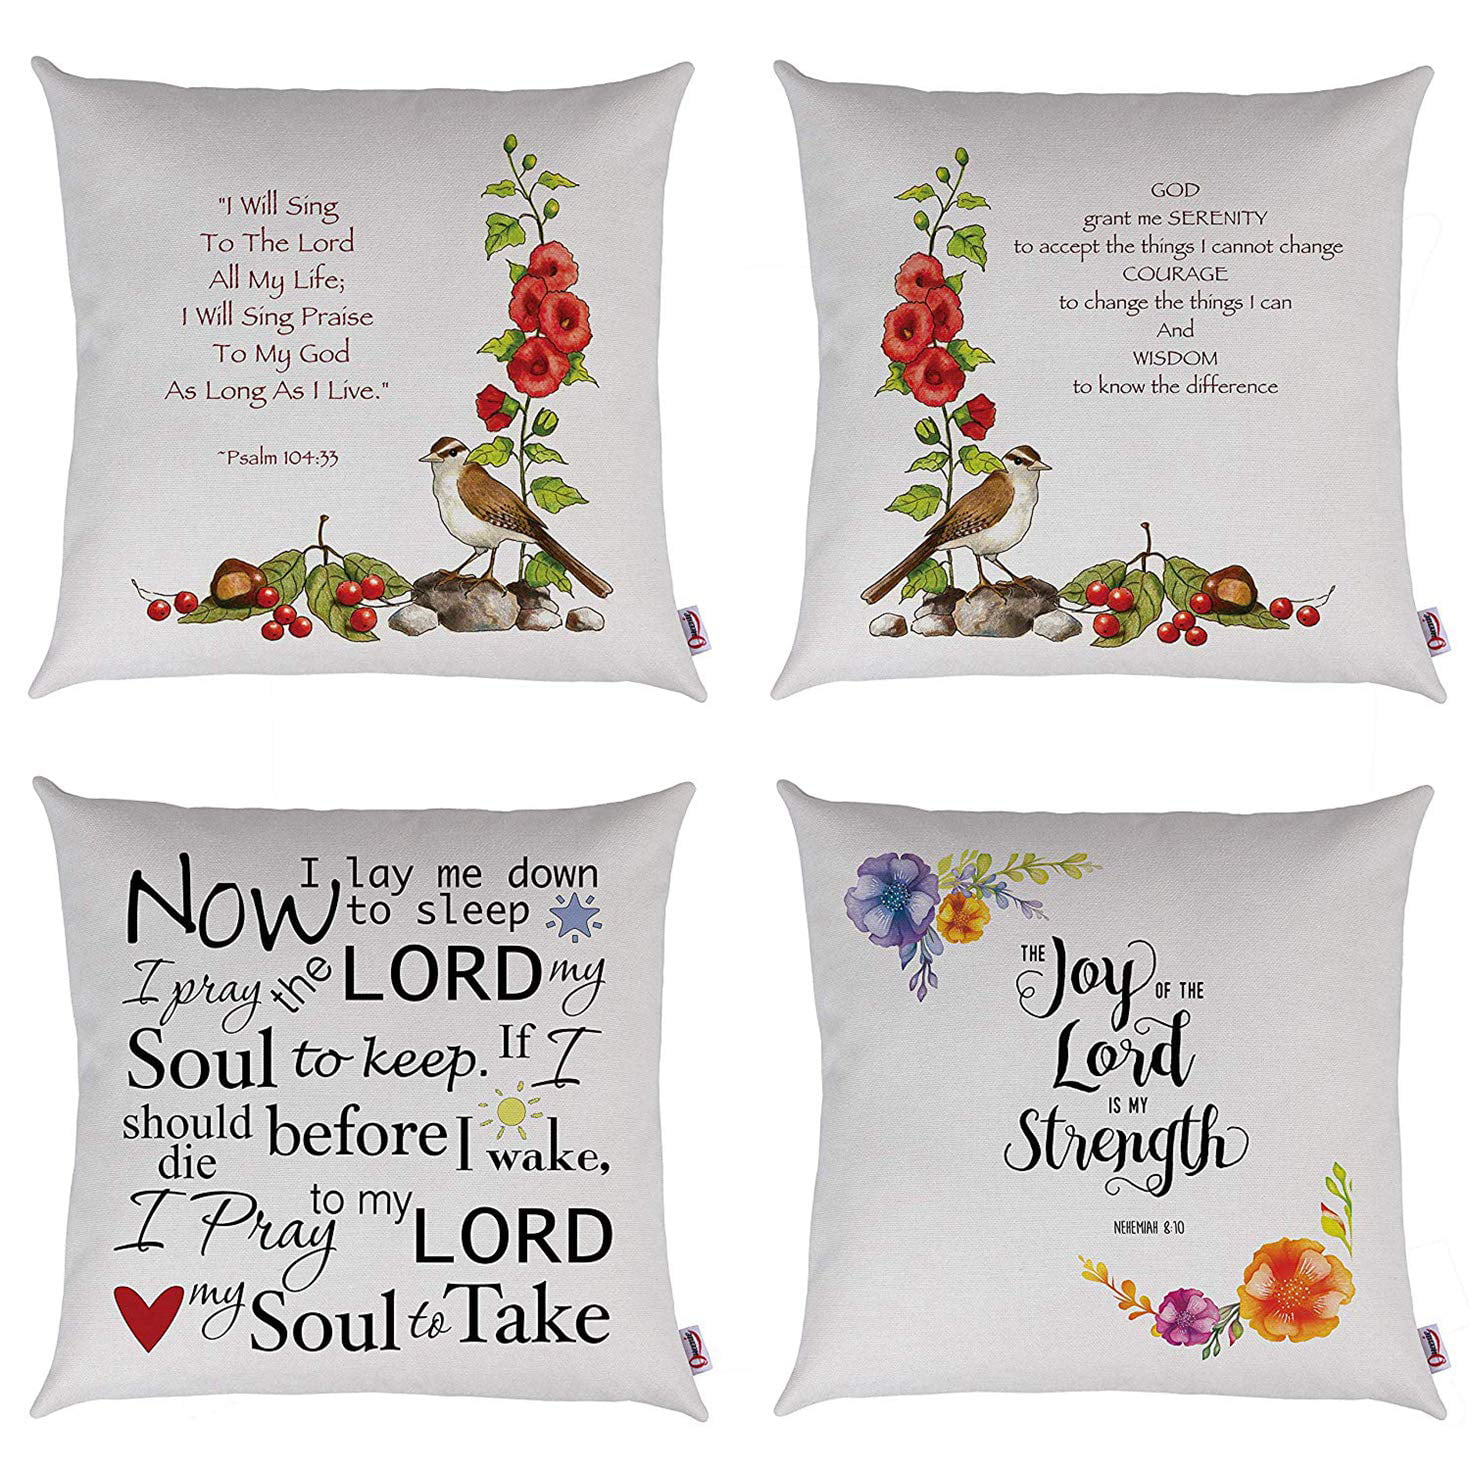 HGOD DESIGNS Unique Pillow Shams Cotton Linen BE Strong and Courageous Pattern Sofa Decor Throw Pillow Cases Cushion Cover 18X18 Inch